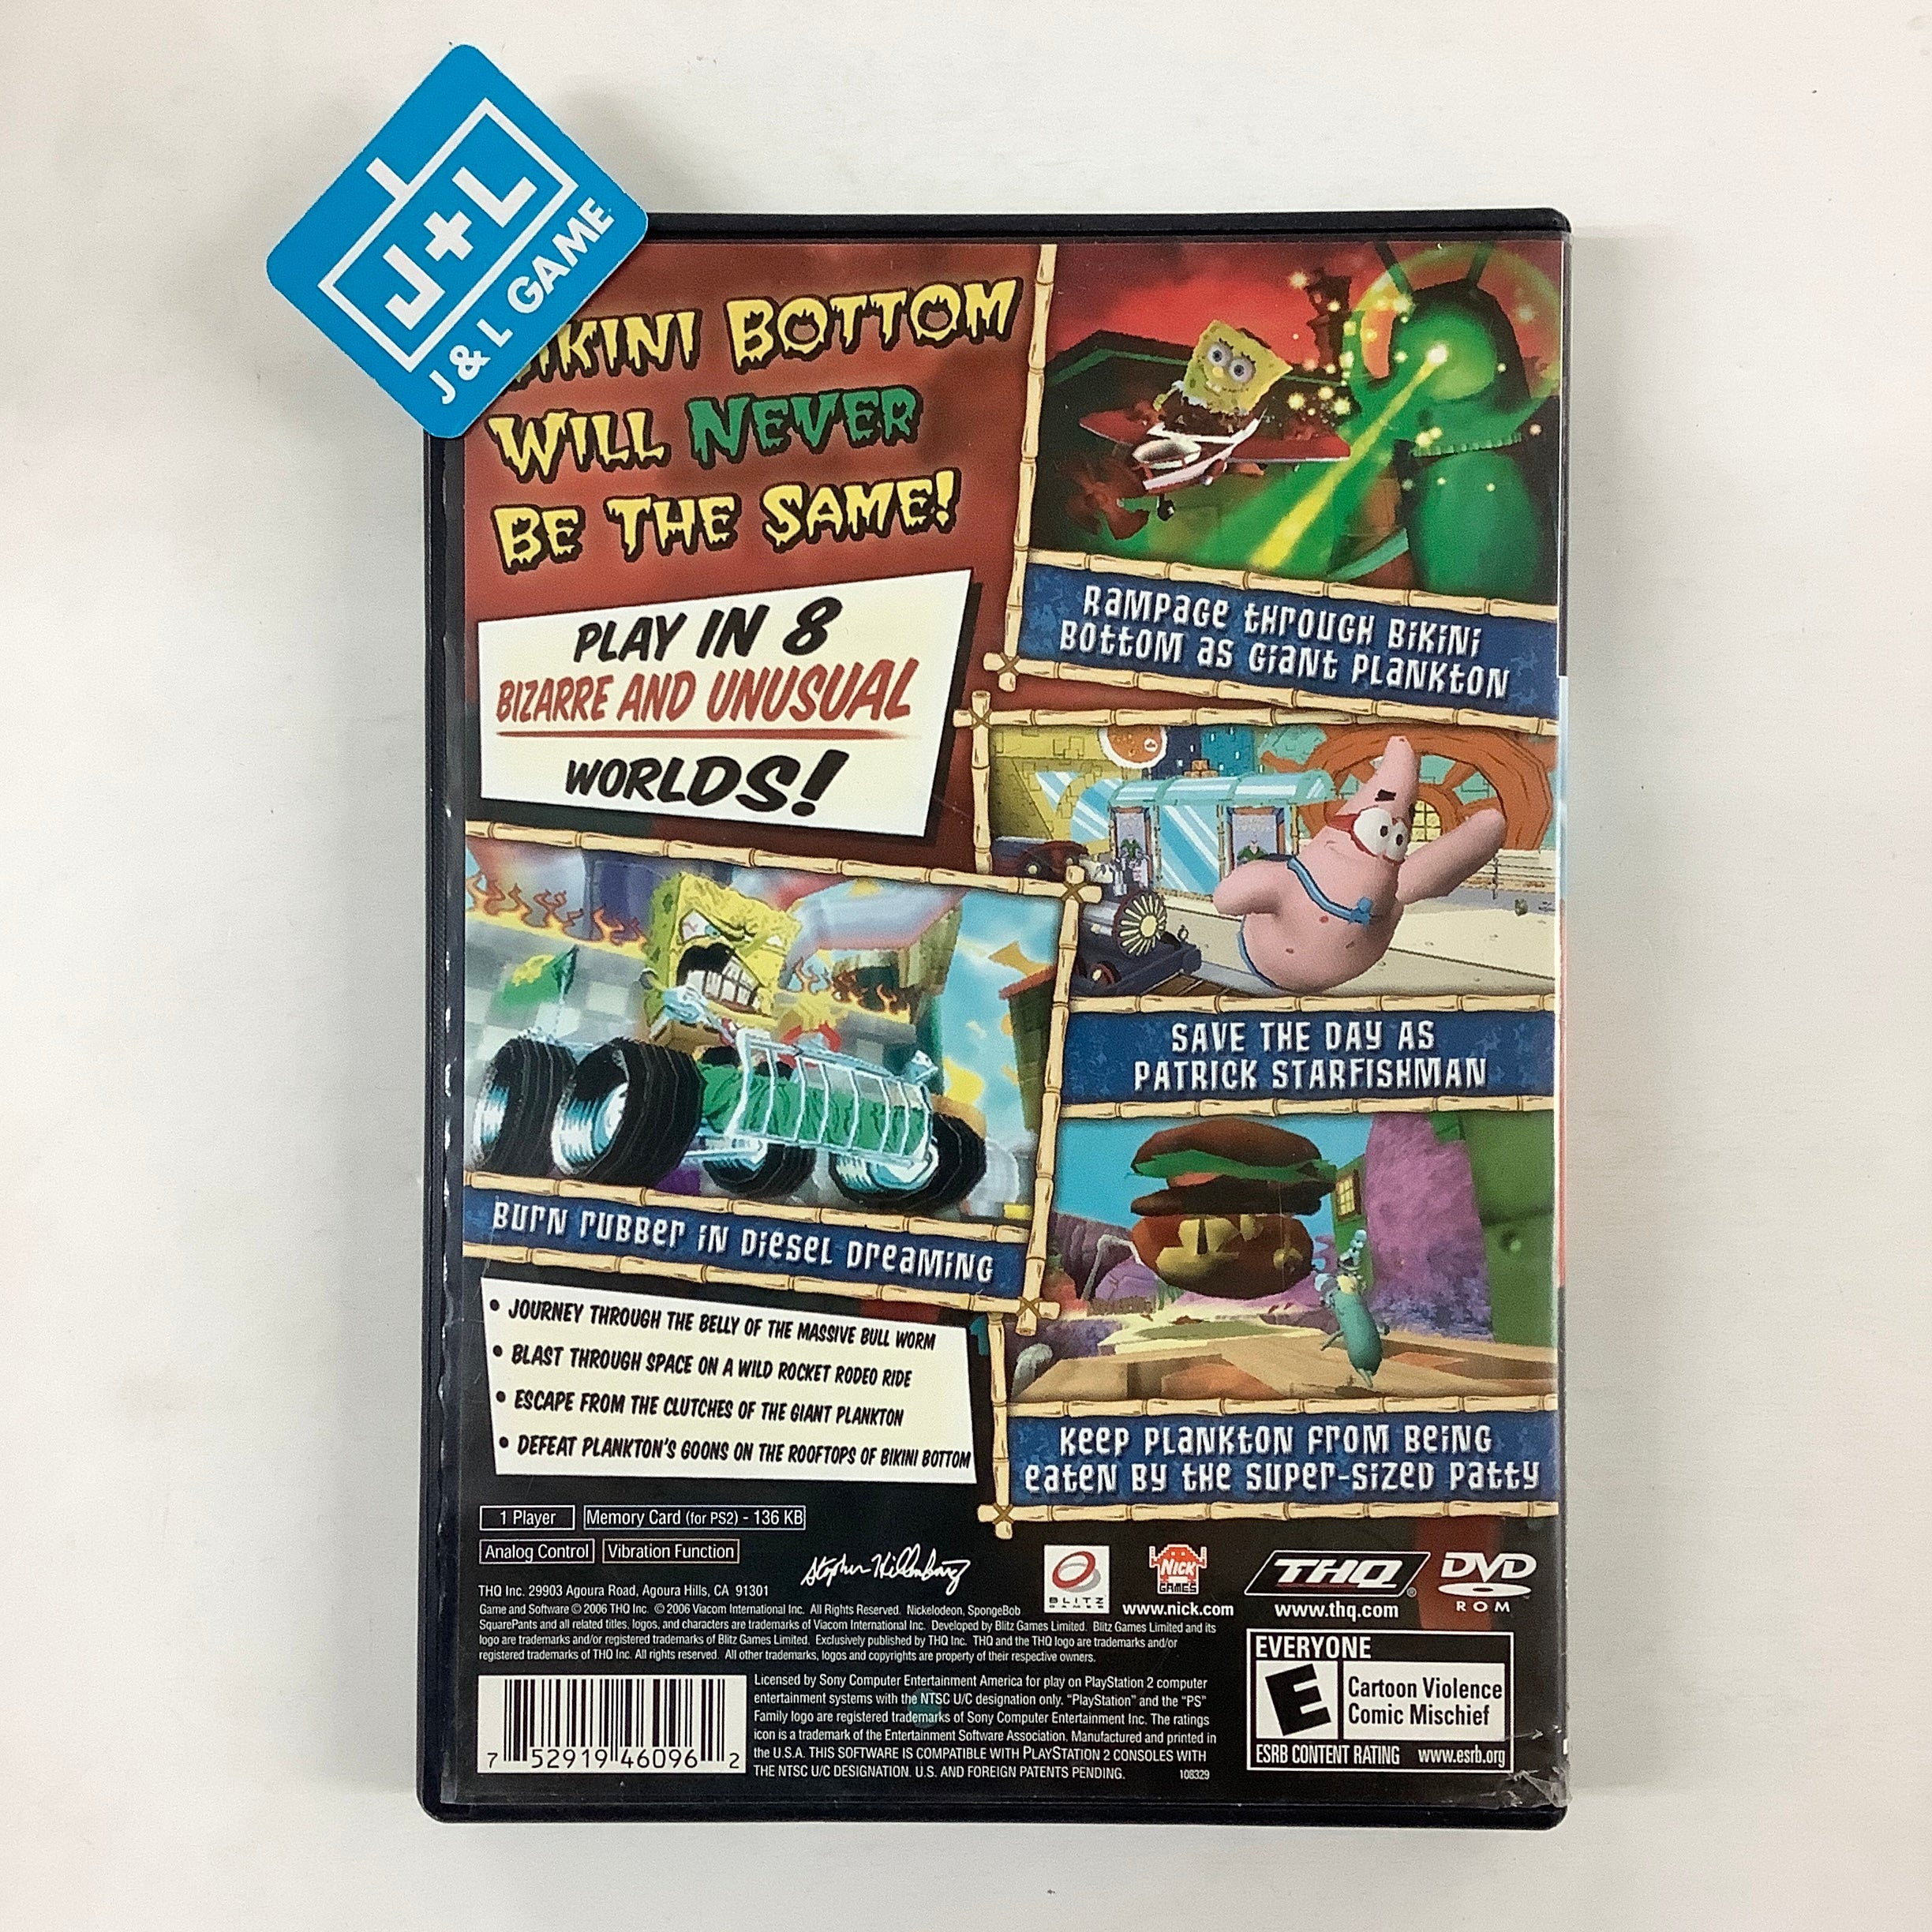 SpongeBob SquarePants: Creature from the Krusty Krab - (PS2) PlayStation 2 [Pre-Owned] Video Games THQ   